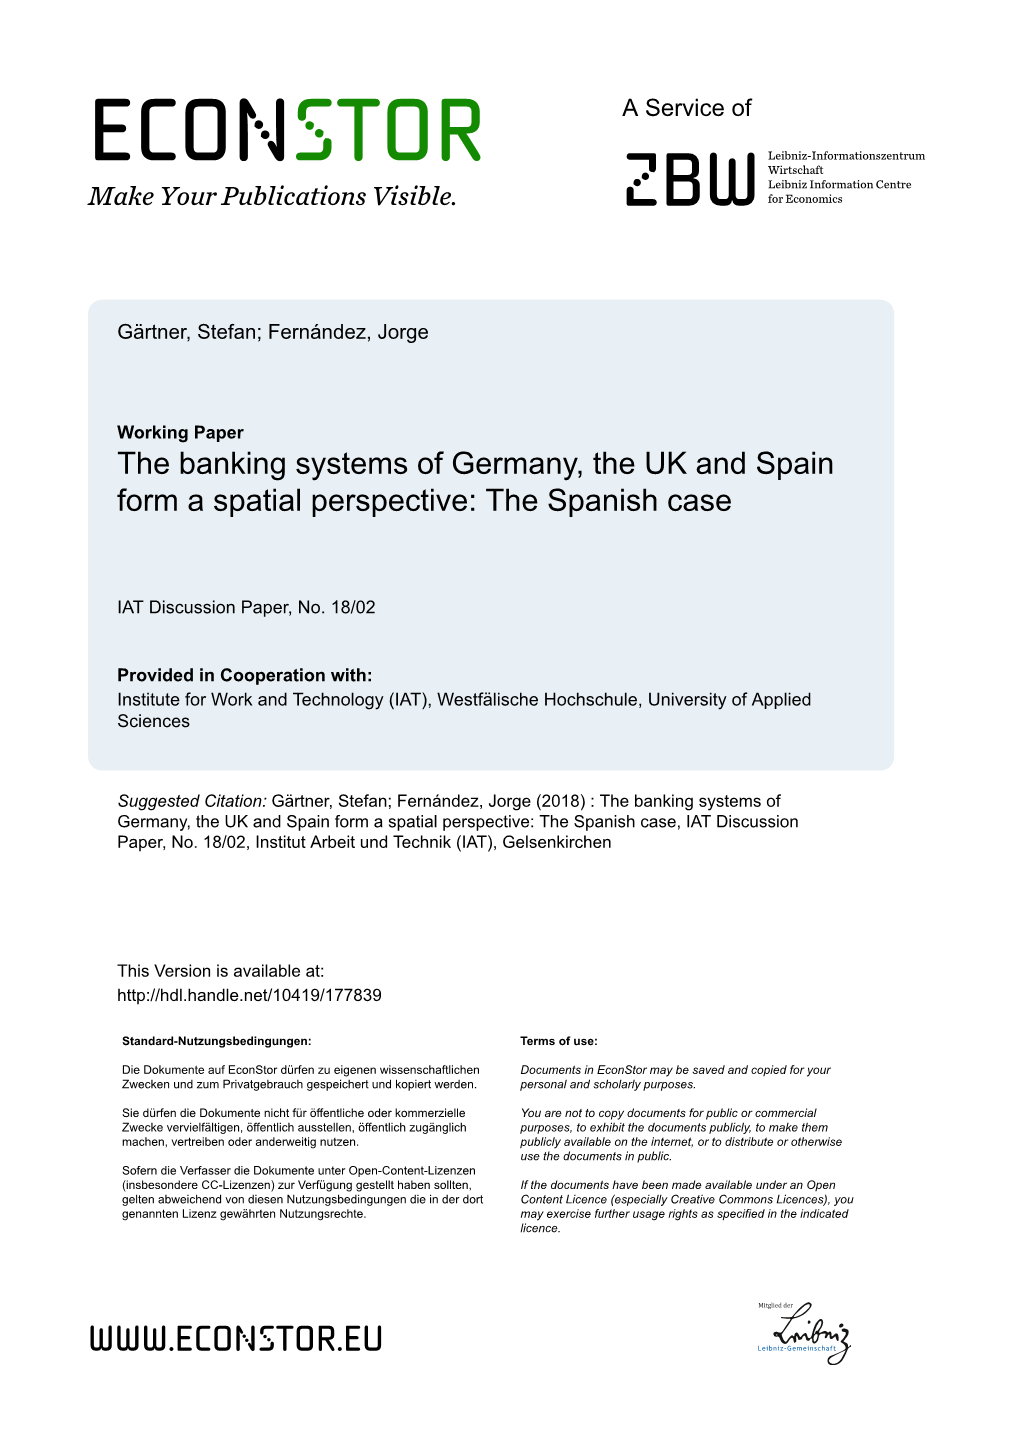 The Banking Systems of Germany, the UK and Spain Form a Spatial Perspective: the Spanish Case